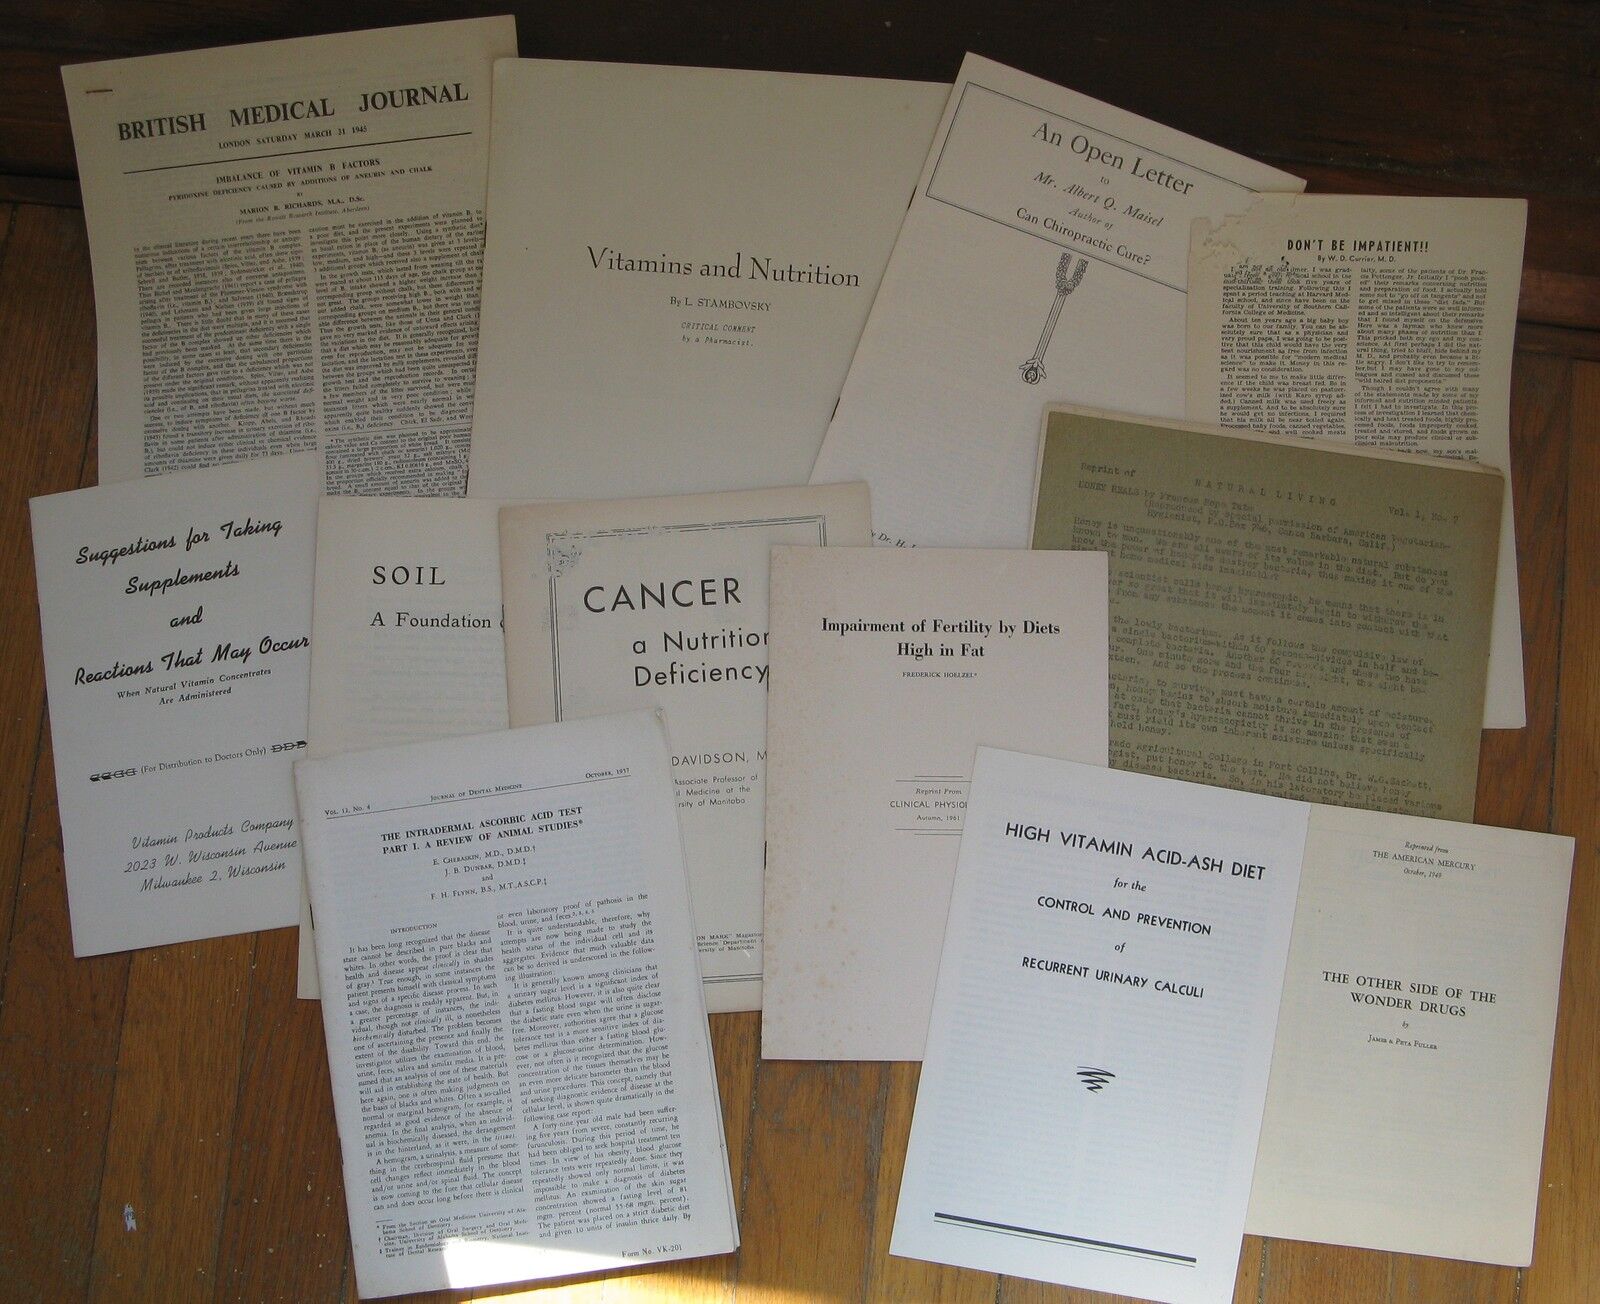 Vitamin and Nutrition - 13 Papers and Booklets from 1930's, 1940's, 1950's